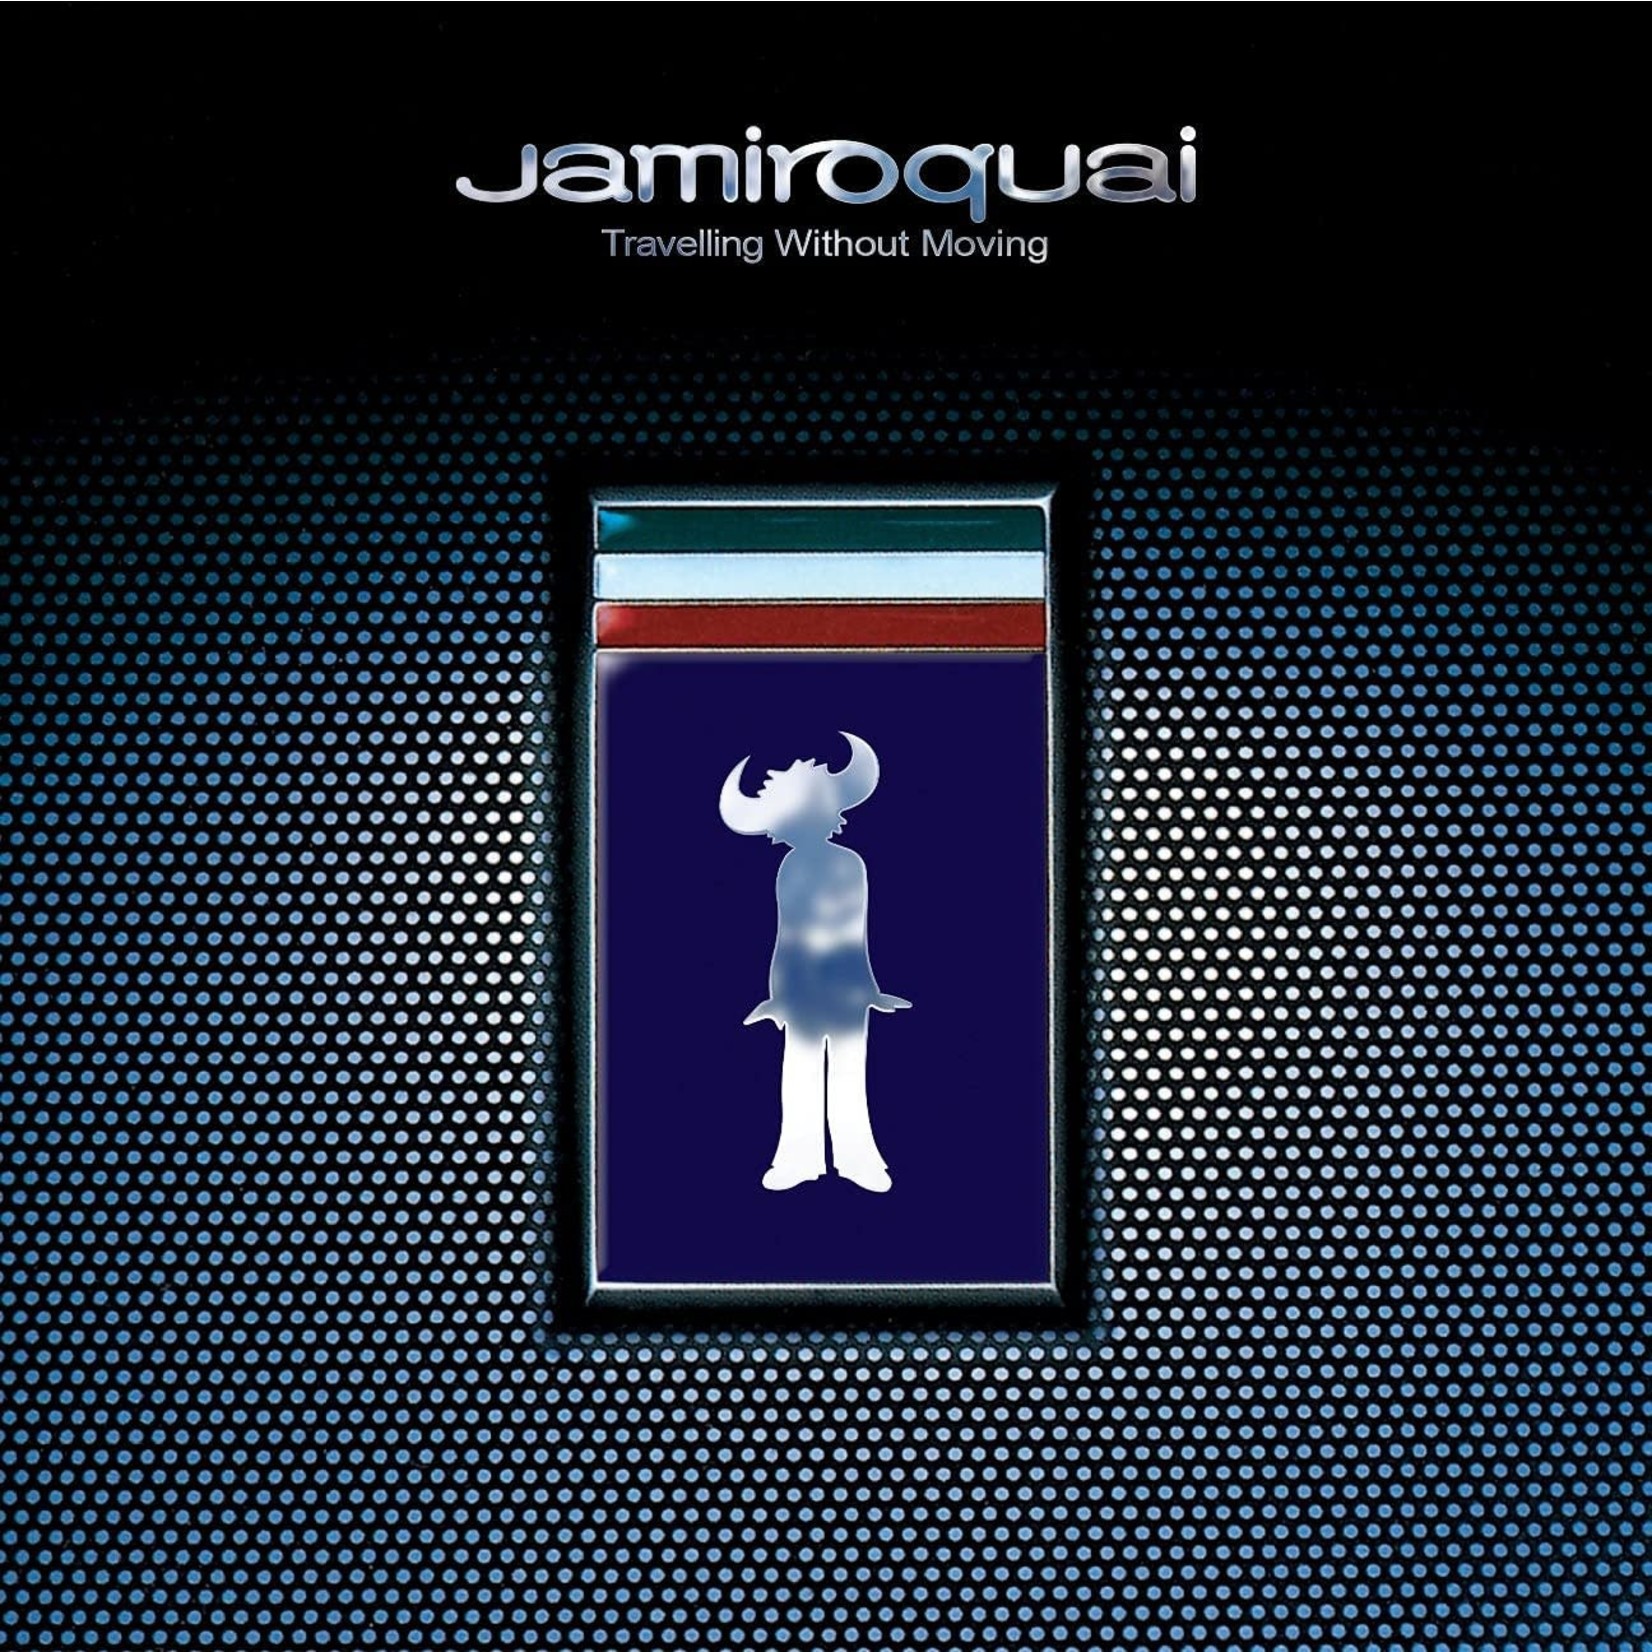 [New] Jamiroquai - Travelling Without Moving (2LP, 25th anniversary edition, yellow vinyl)